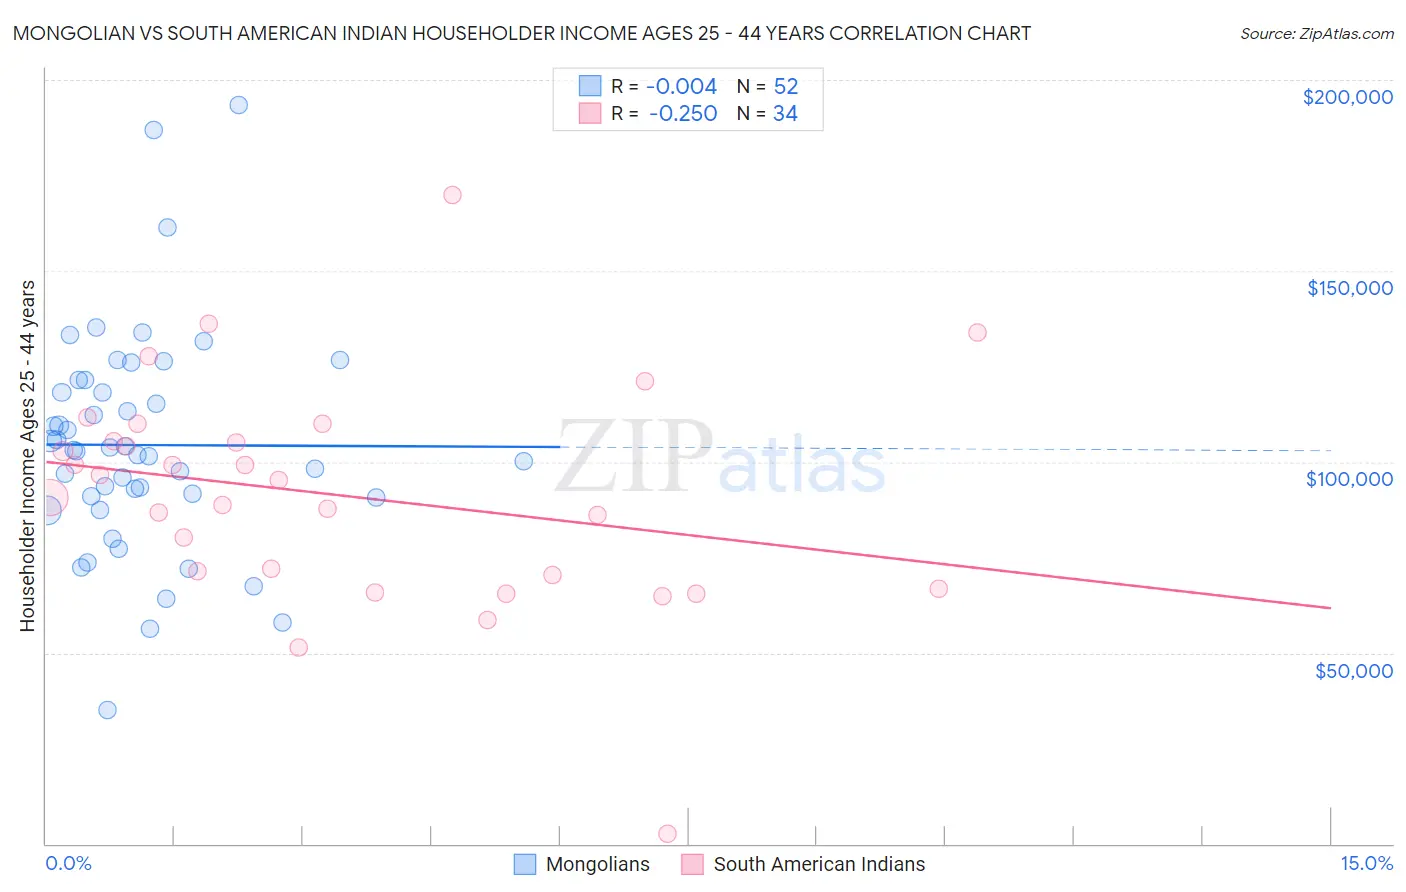 Mongolian vs South American Indian Householder Income Ages 25 - 44 years